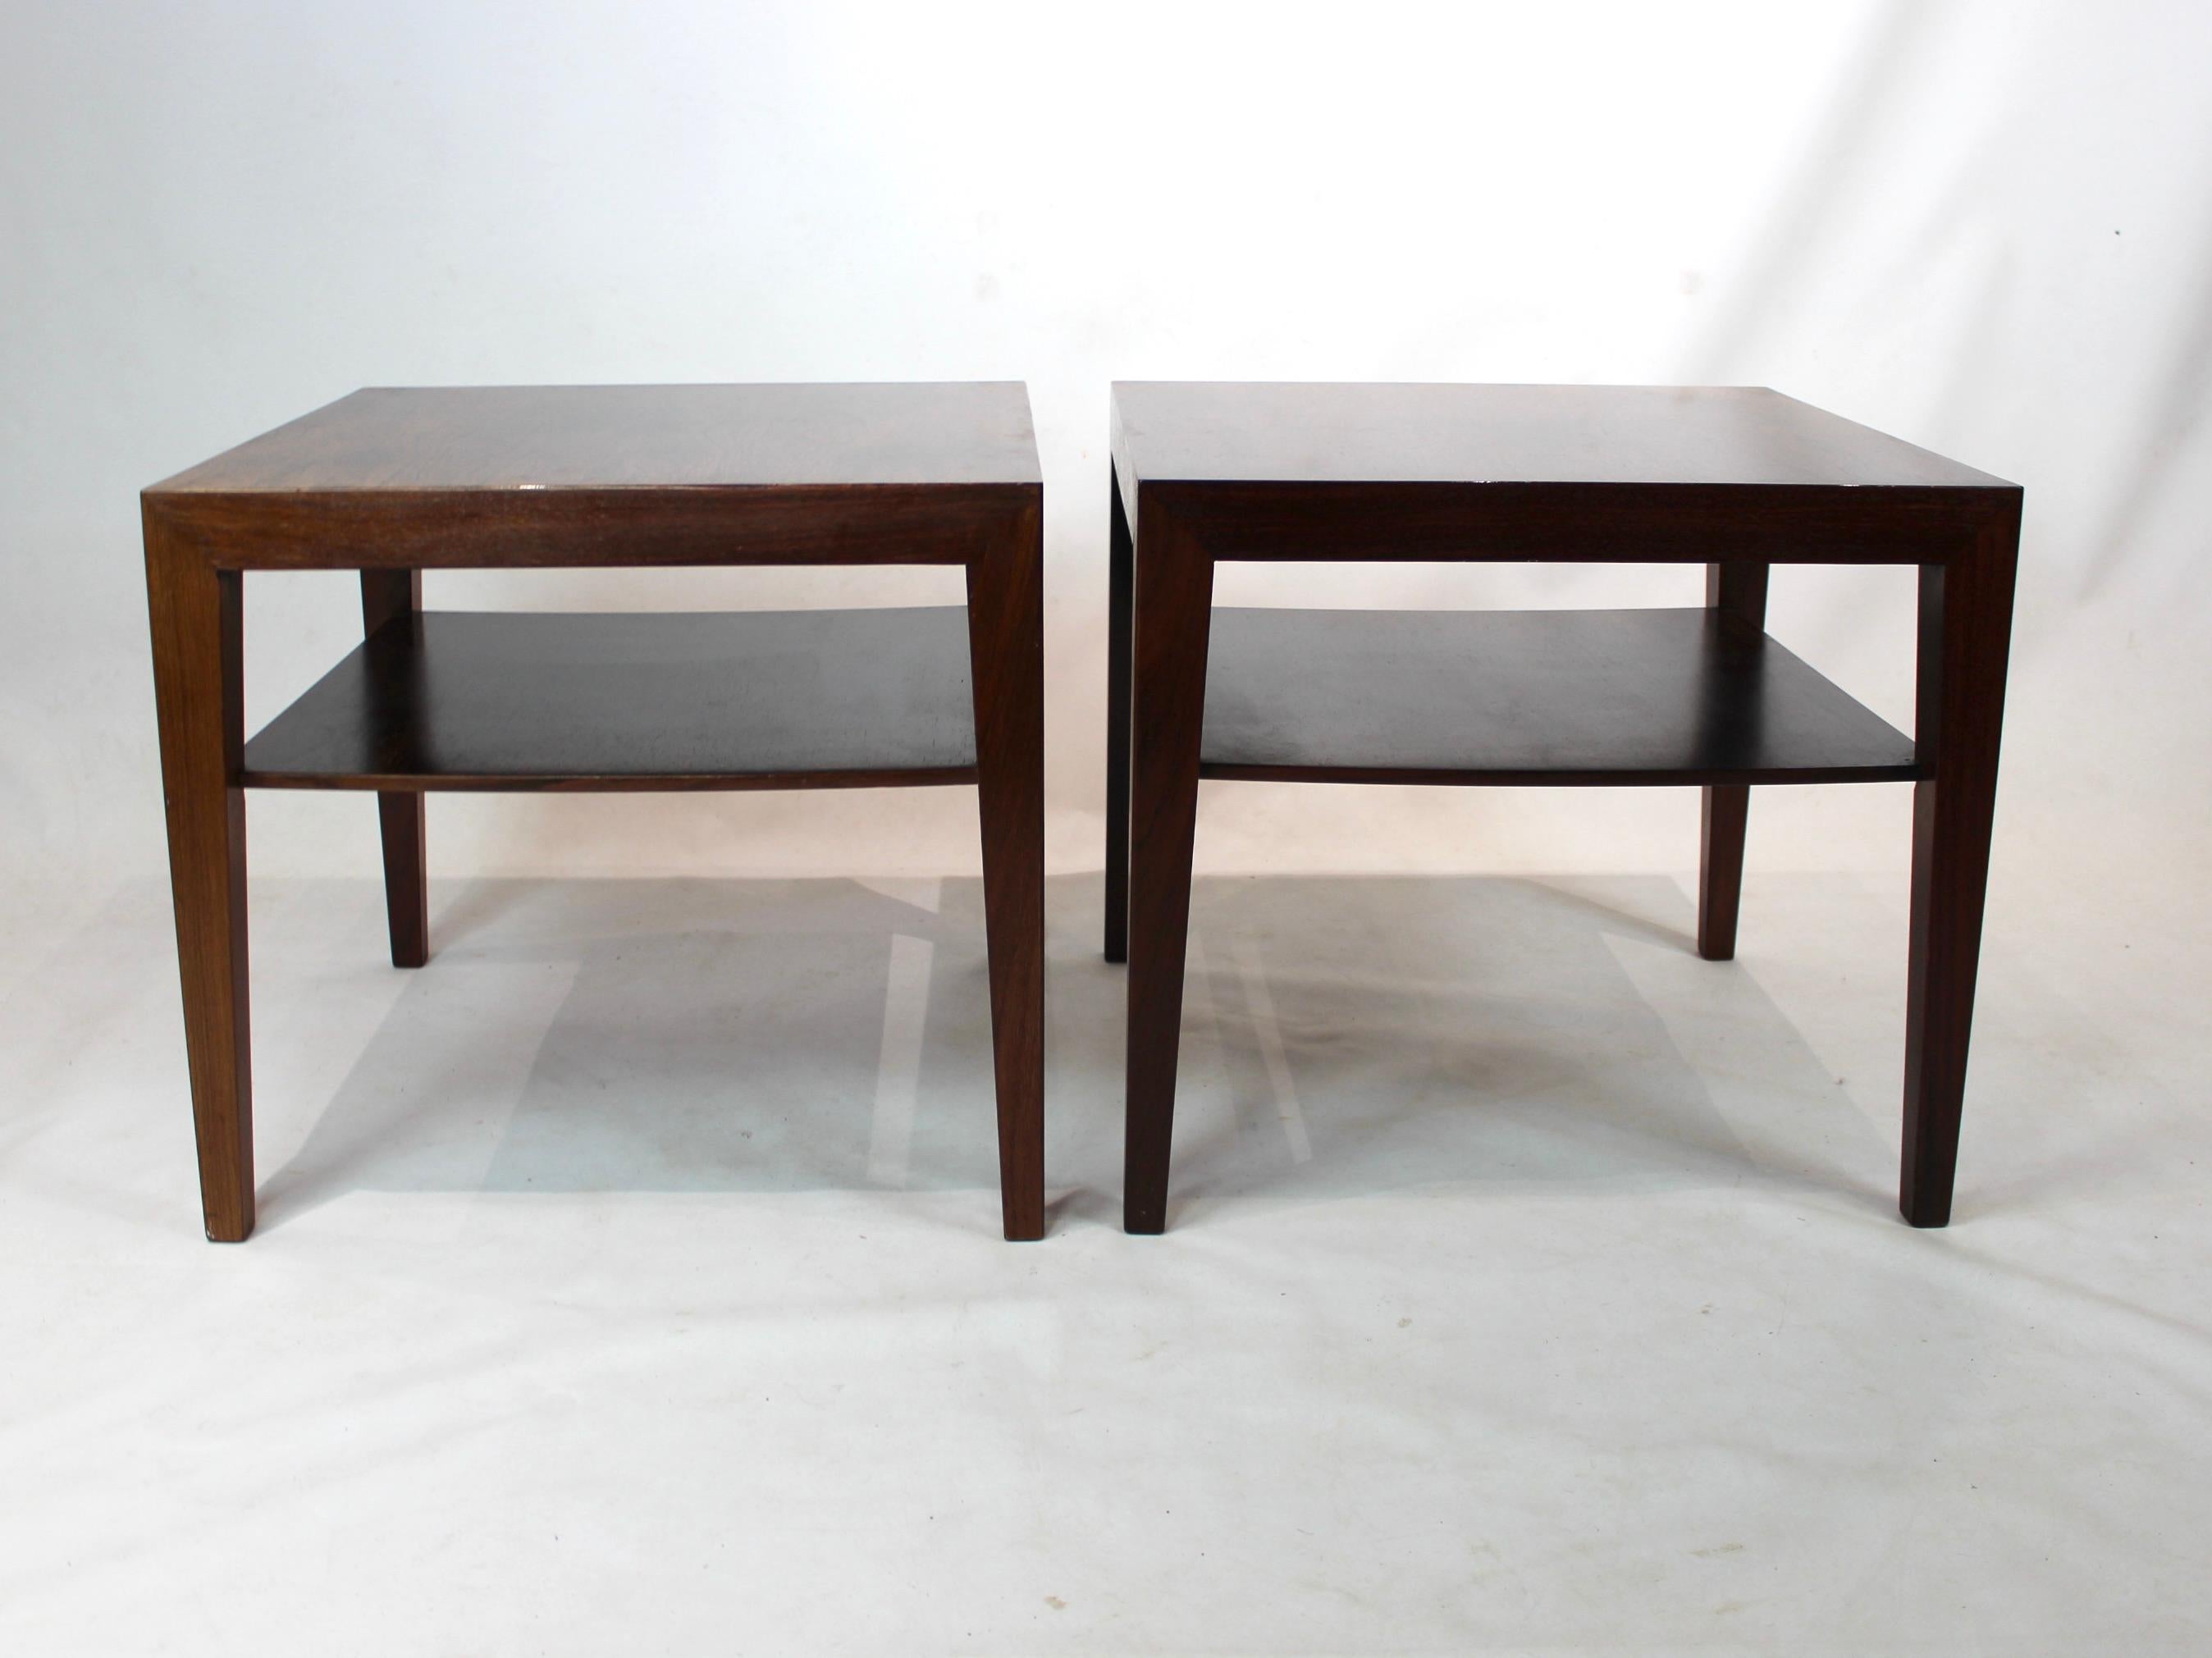 A pair of side tables in rosewood by Severin Hansen for Haslev Furniture factory from the 1960s. The tables are in great vintage condition.
Measures: H 50 cm, W 55 cm and D 55 cm.